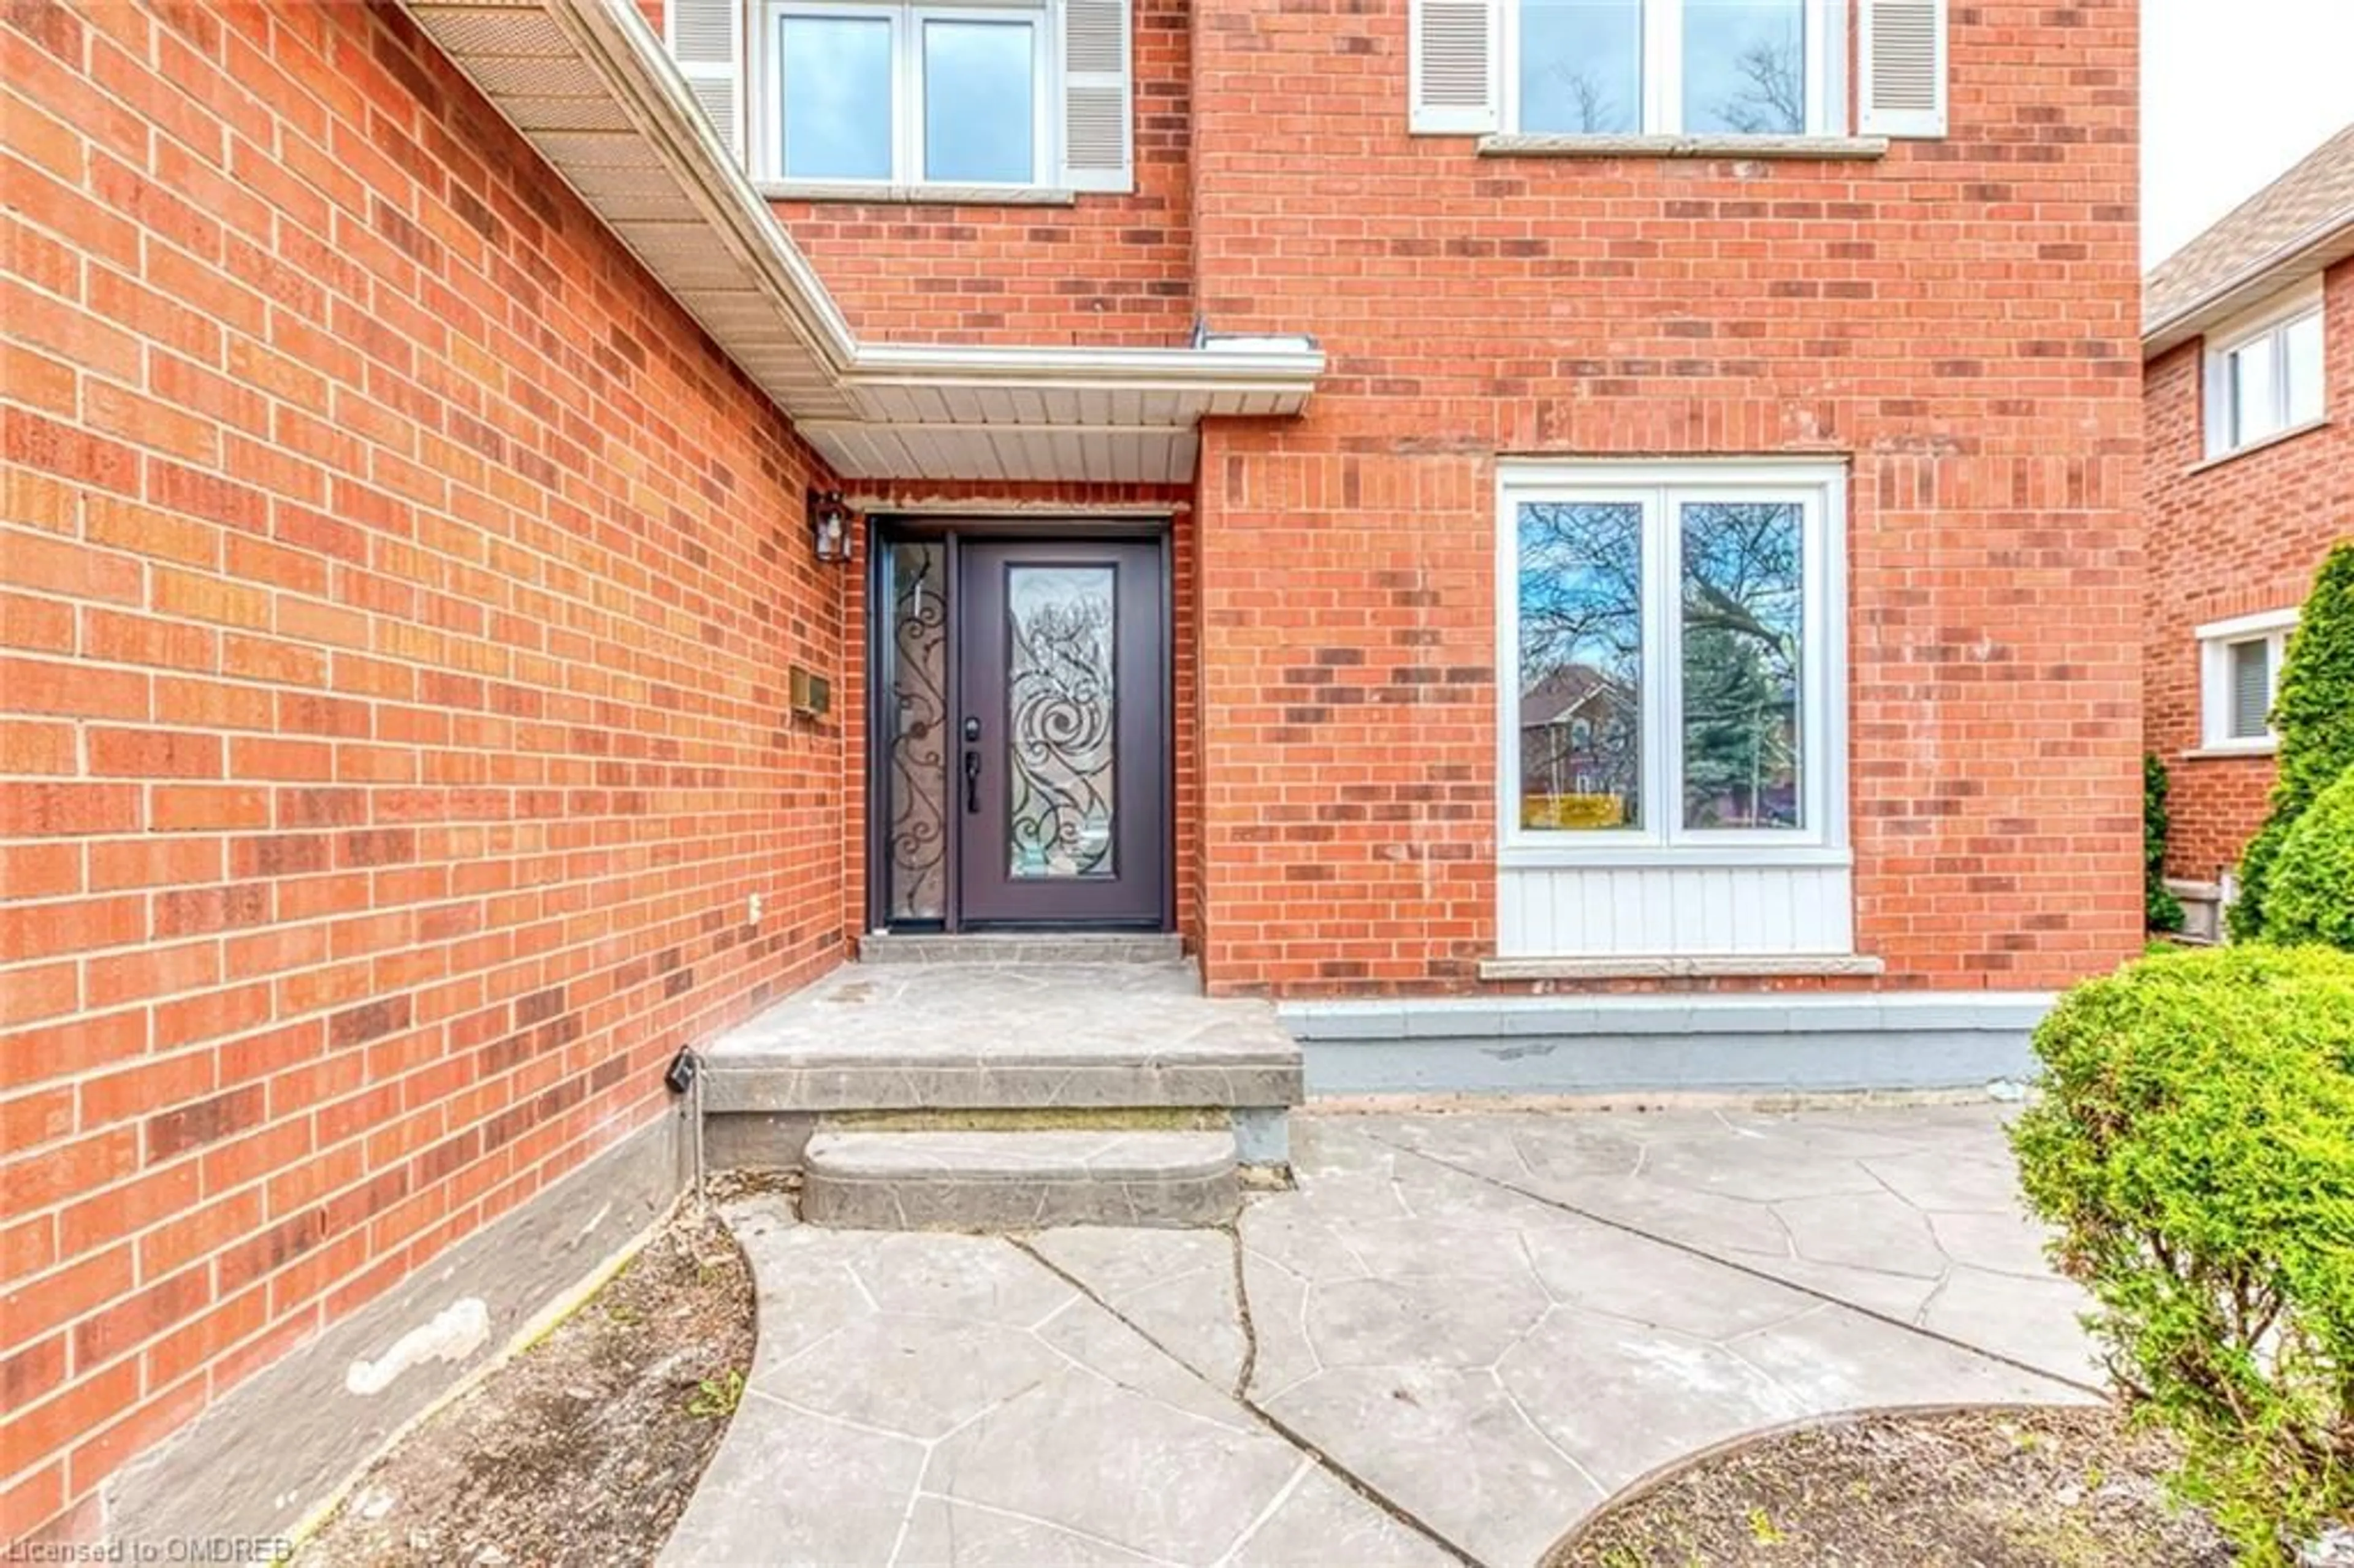 Home with brick exterior material for 2124 Grand Blvd, Oakville Ontario L6H 5M3